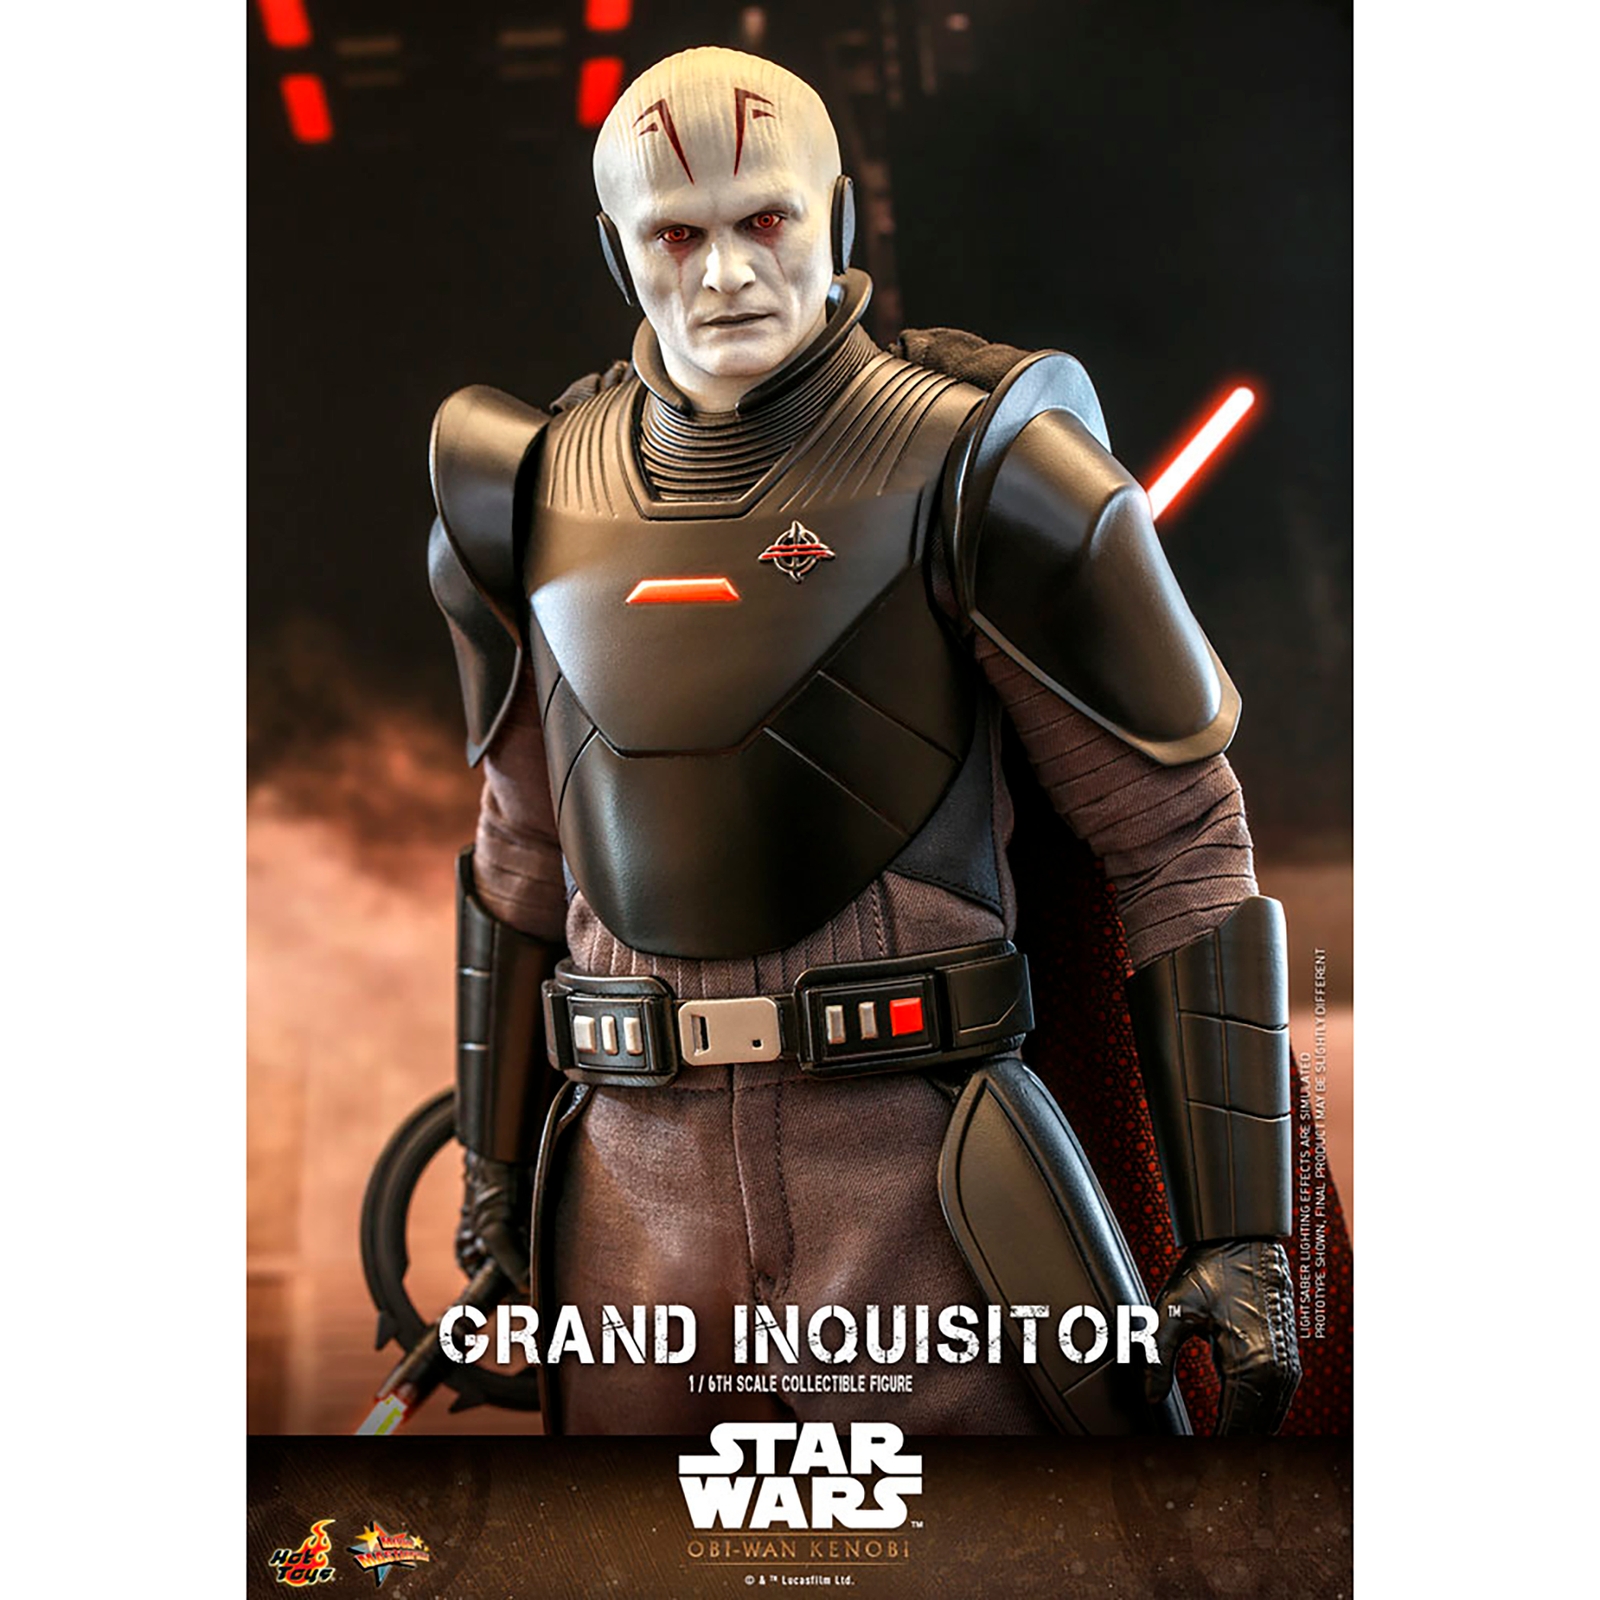 Photos - Action Figures / Transformers Hot Toys Star Wars Obi-Wan Kenobi 1:6 Scale Grand Inquisitor Statue (30cm)